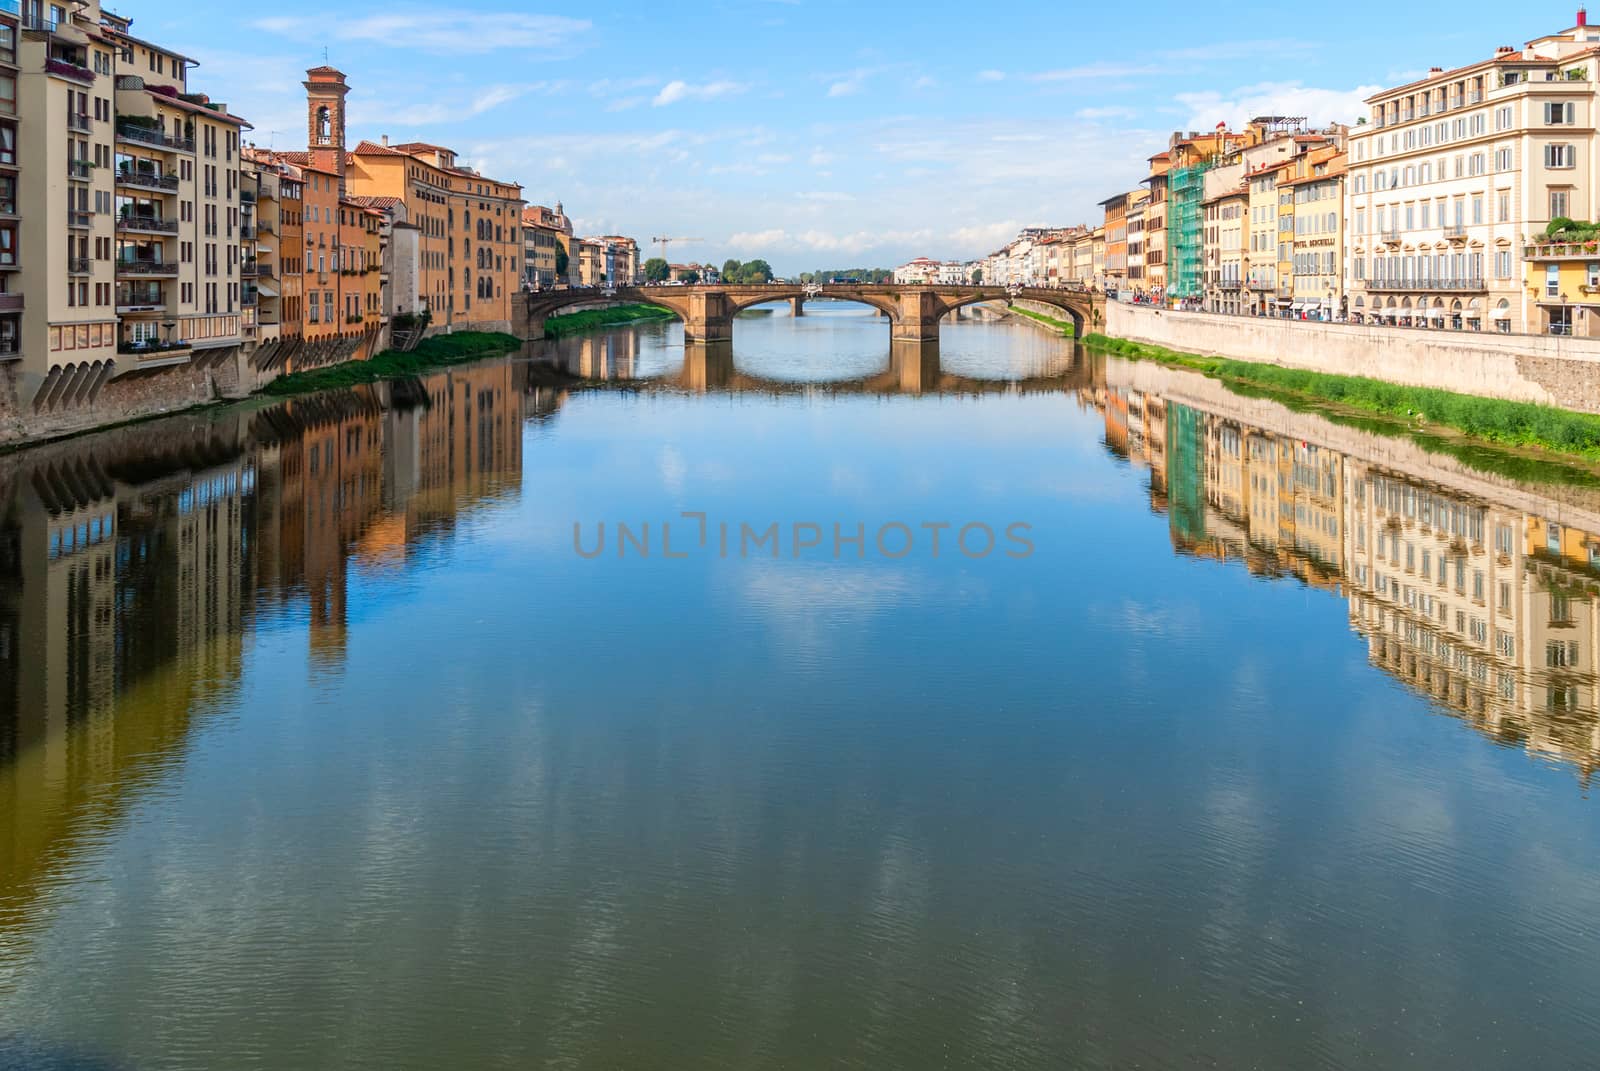 View of stone bridge over Arno river in Florence, Tuscany, Italy by Zhukow